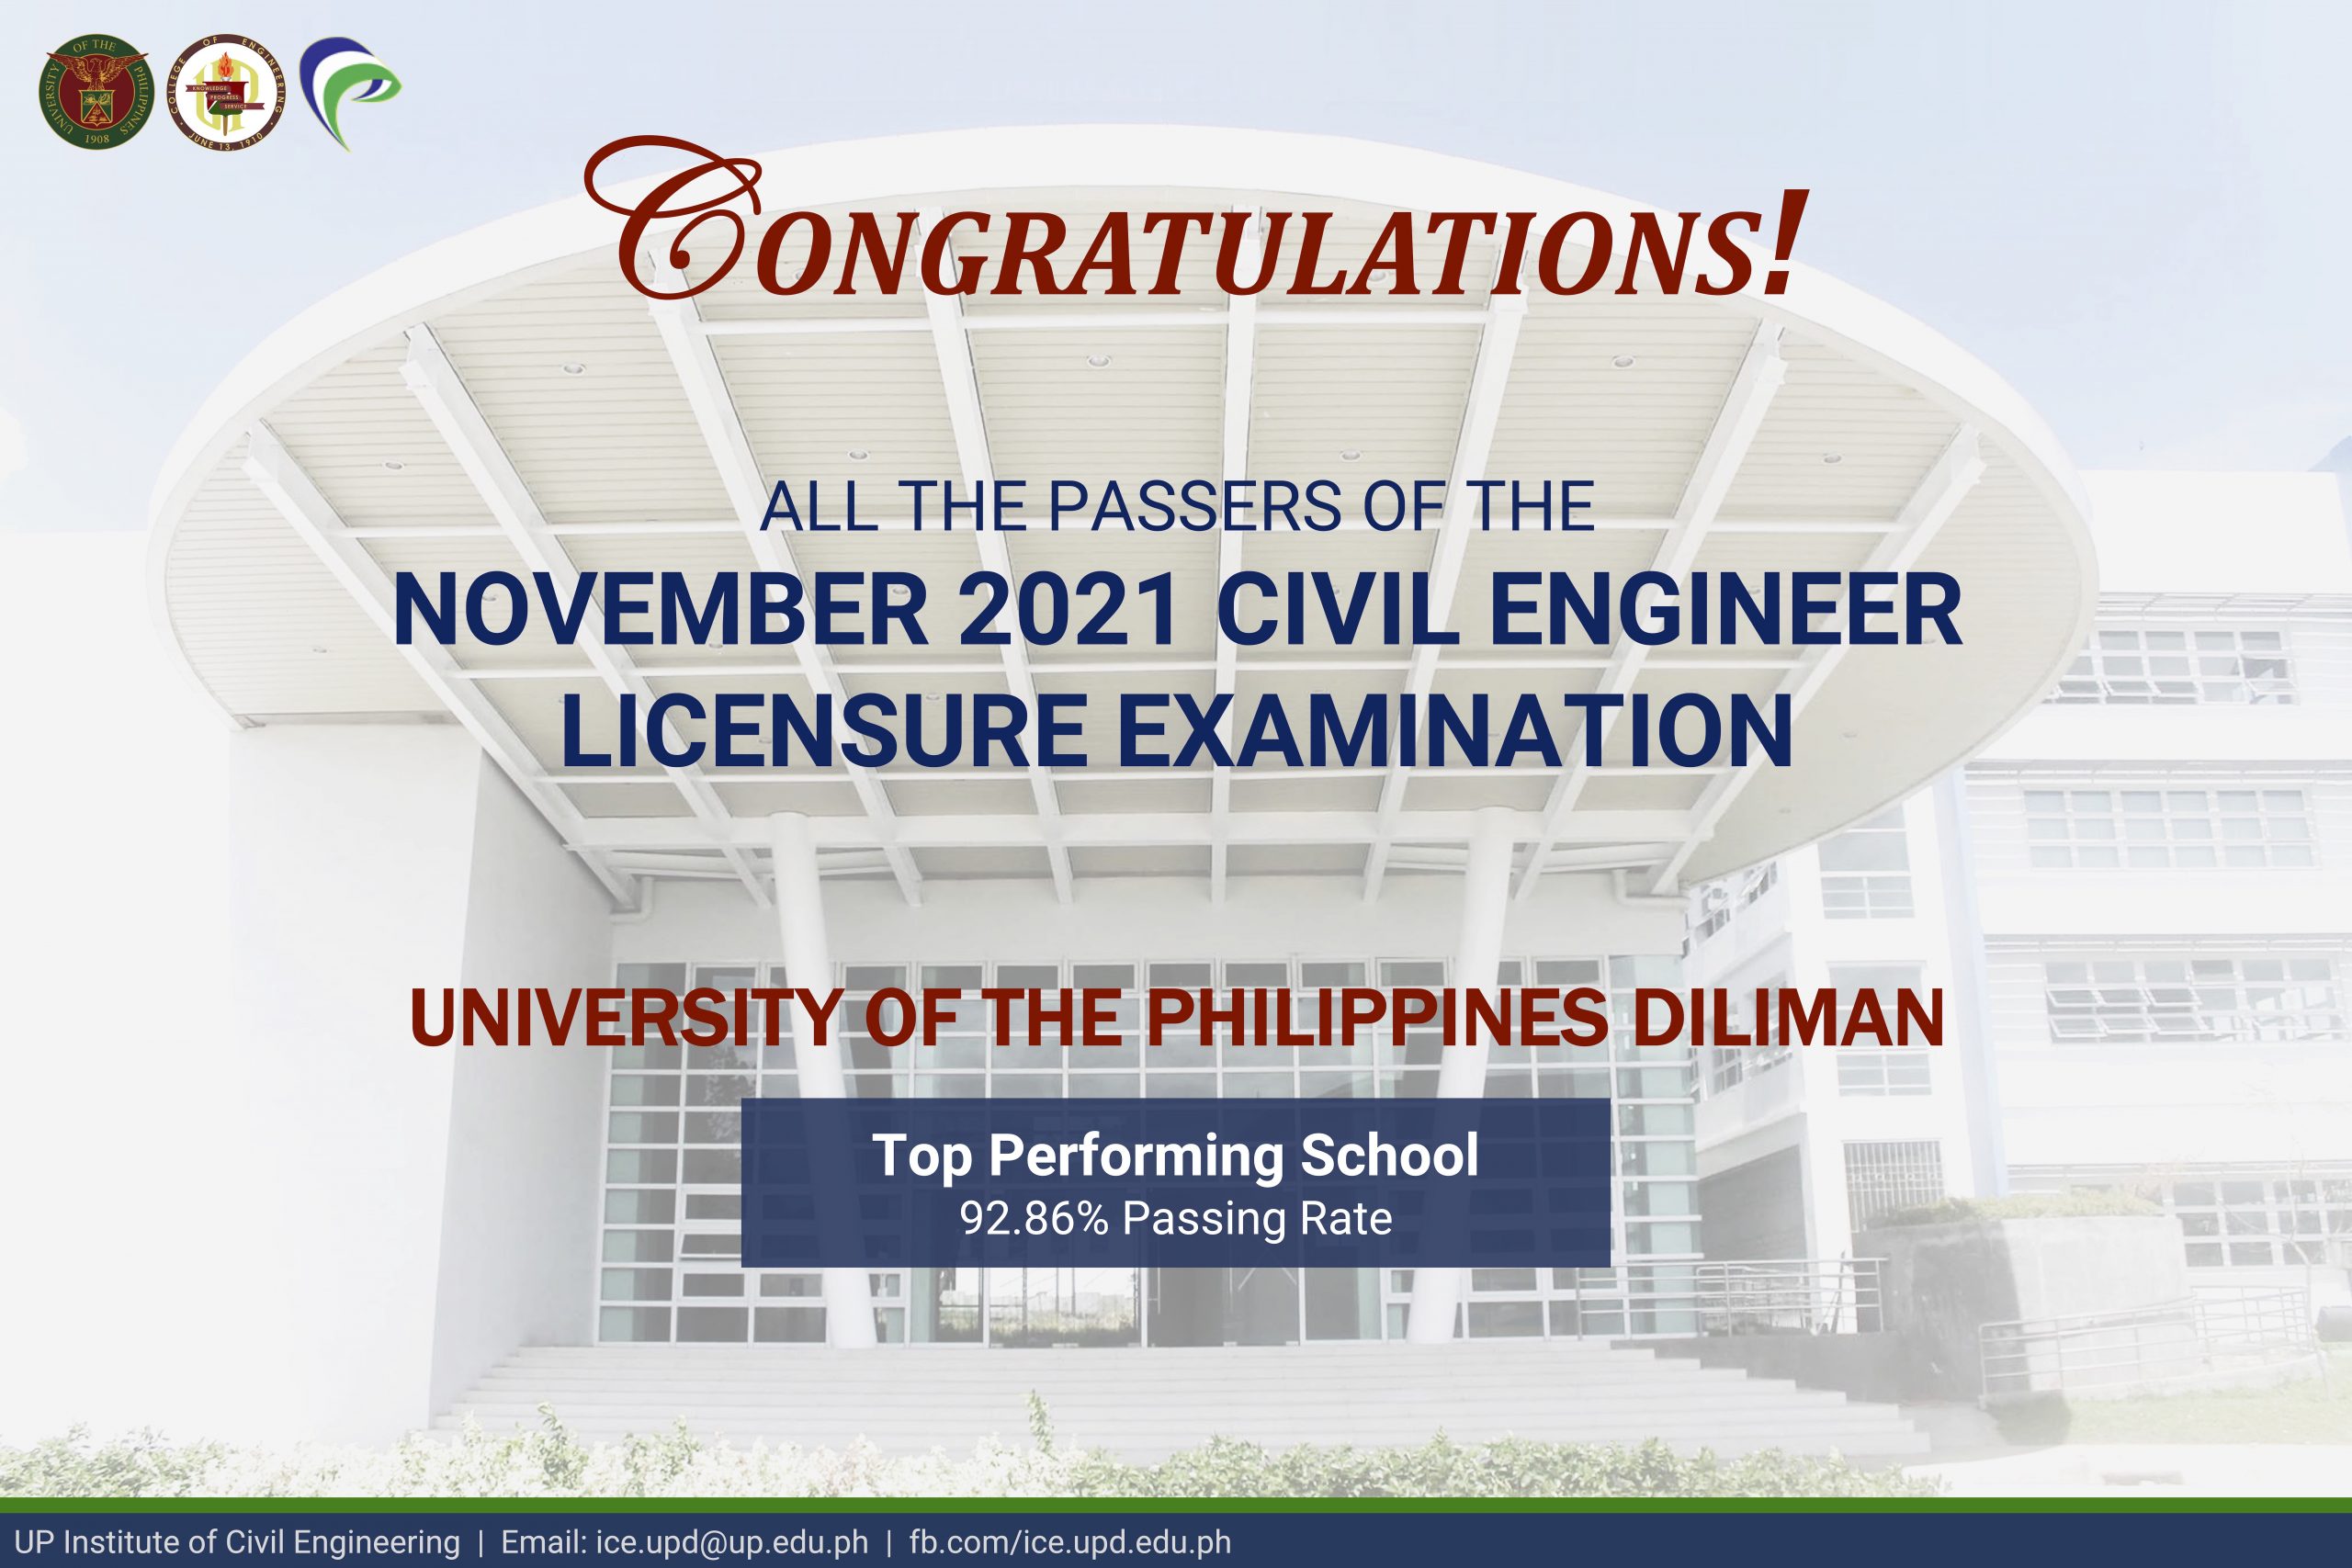 UP Diliman tops the Nov 2021 Civil Engineer Licensure Examination